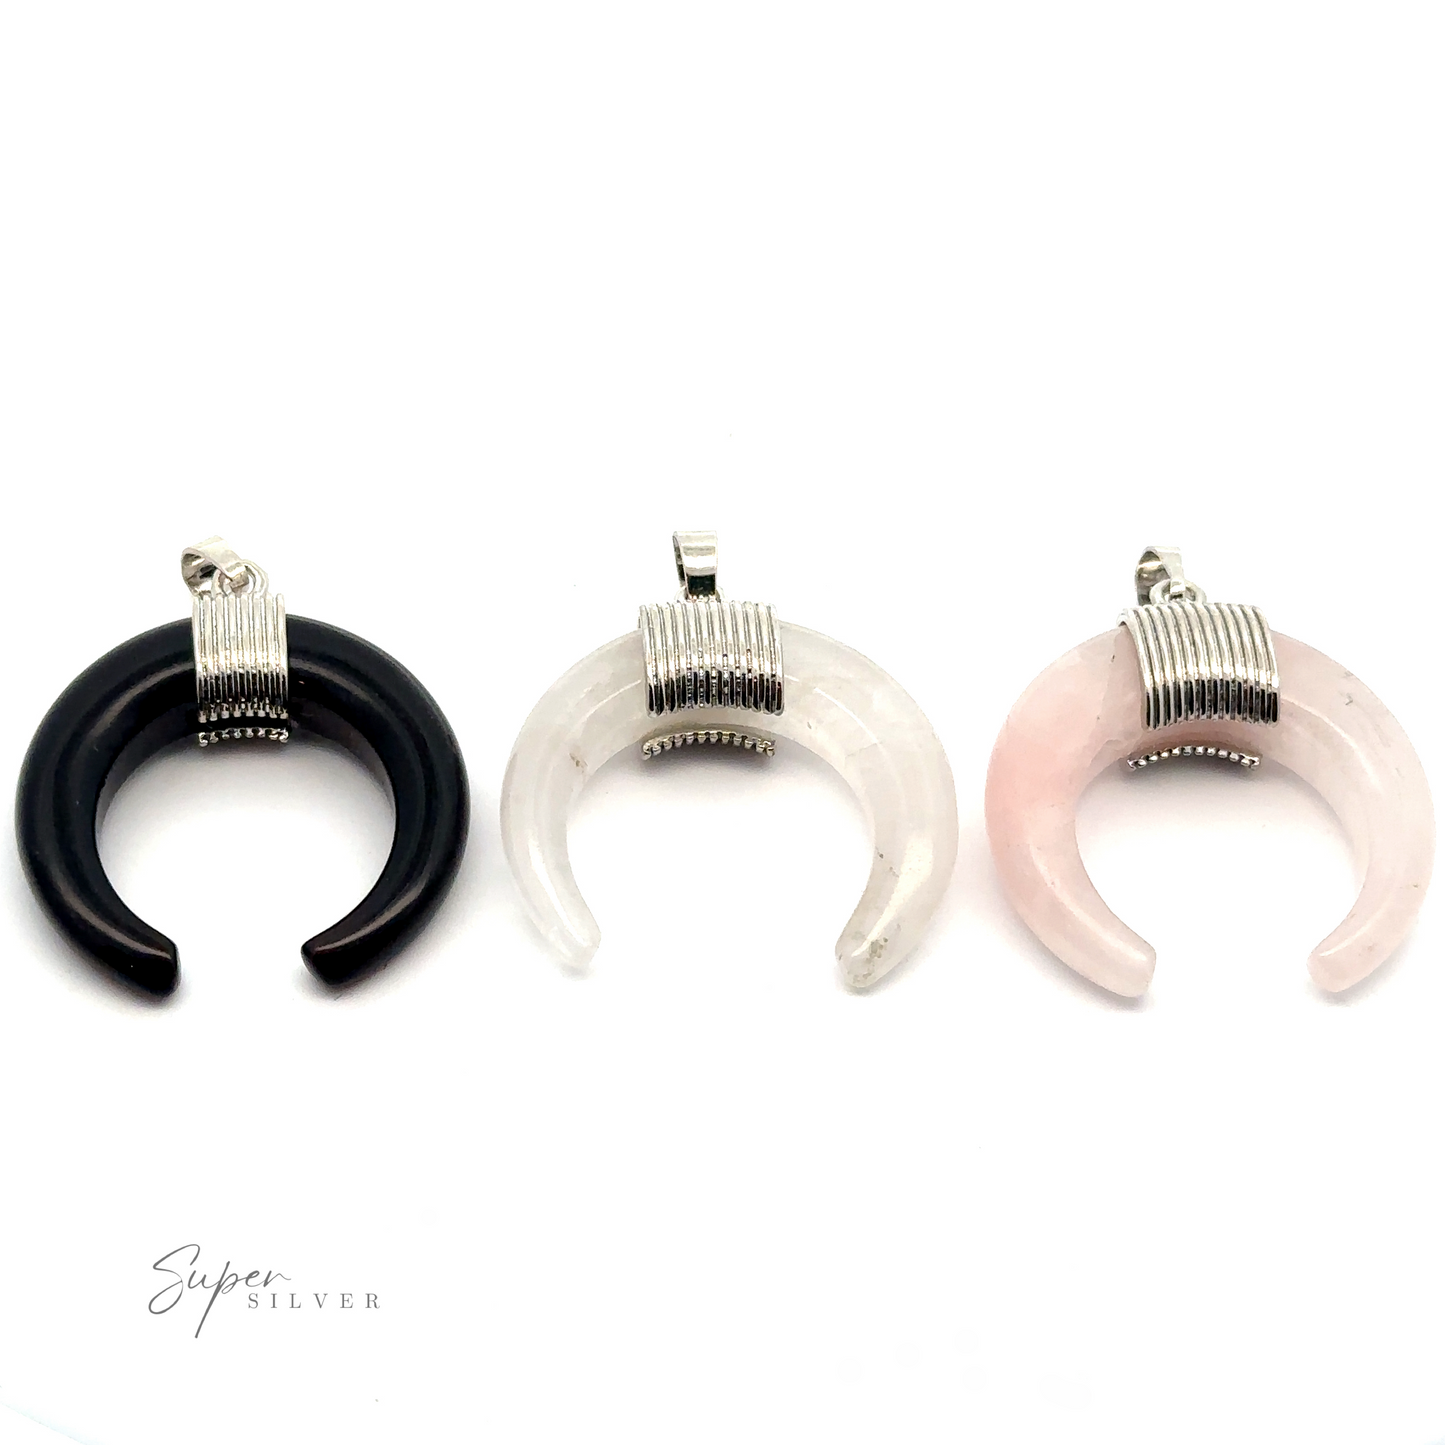 Three Naja Stone Pendants in black, white, and pink with silver wrapped tops evoke the classic elegance of Navajo crescent designs and are displayed against a white background.